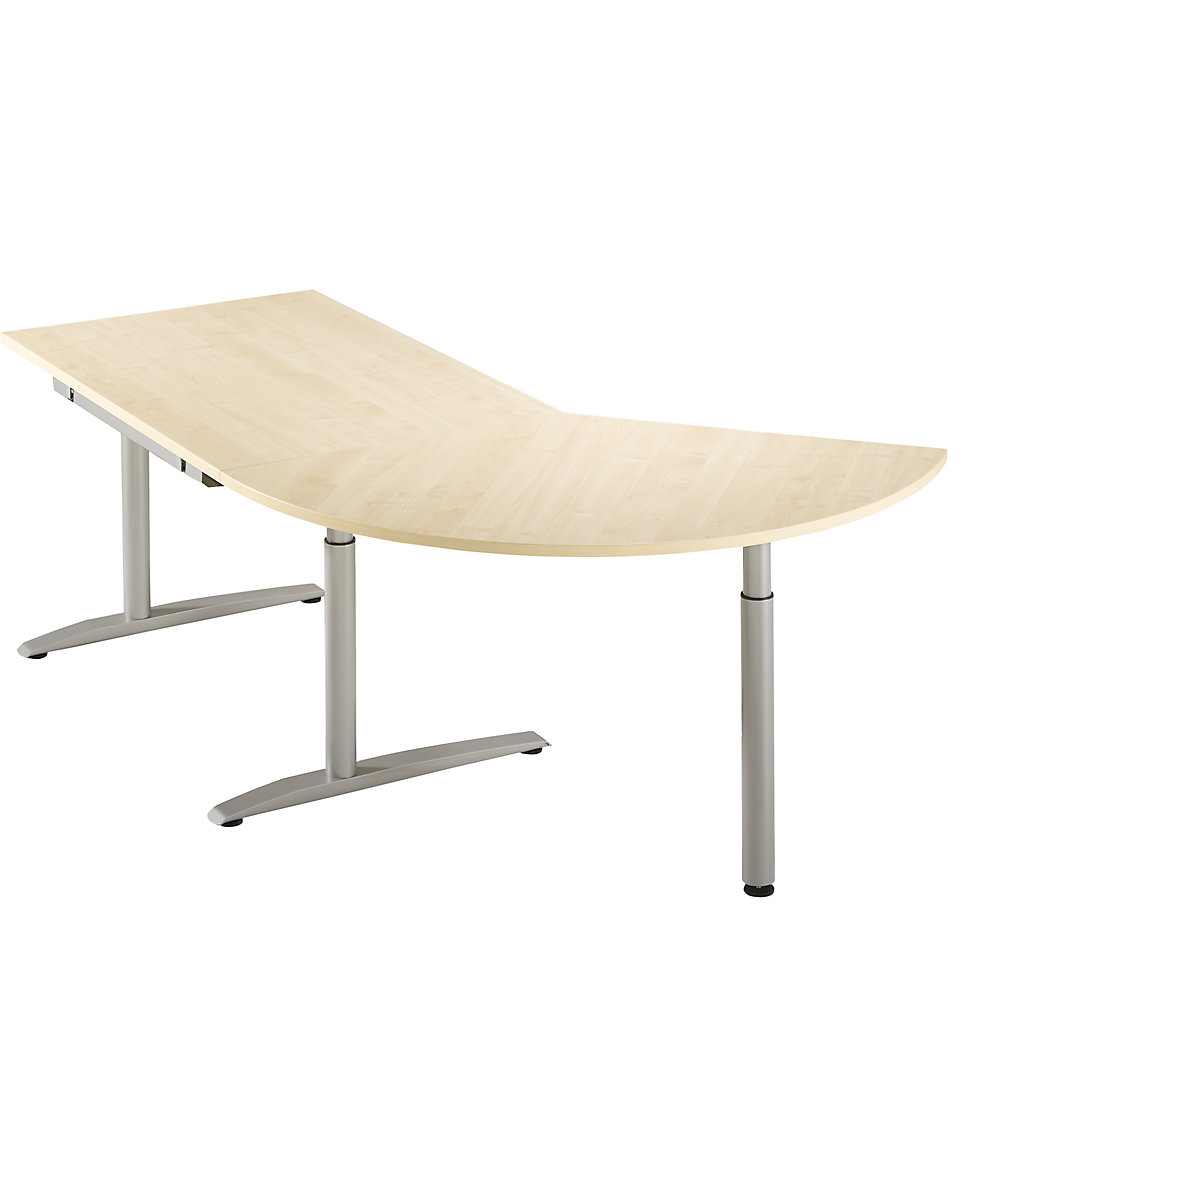 Add-on table, height adjustable from 680 – 820 mm HANNA, 3/8 circle with support foot, maple finish-5